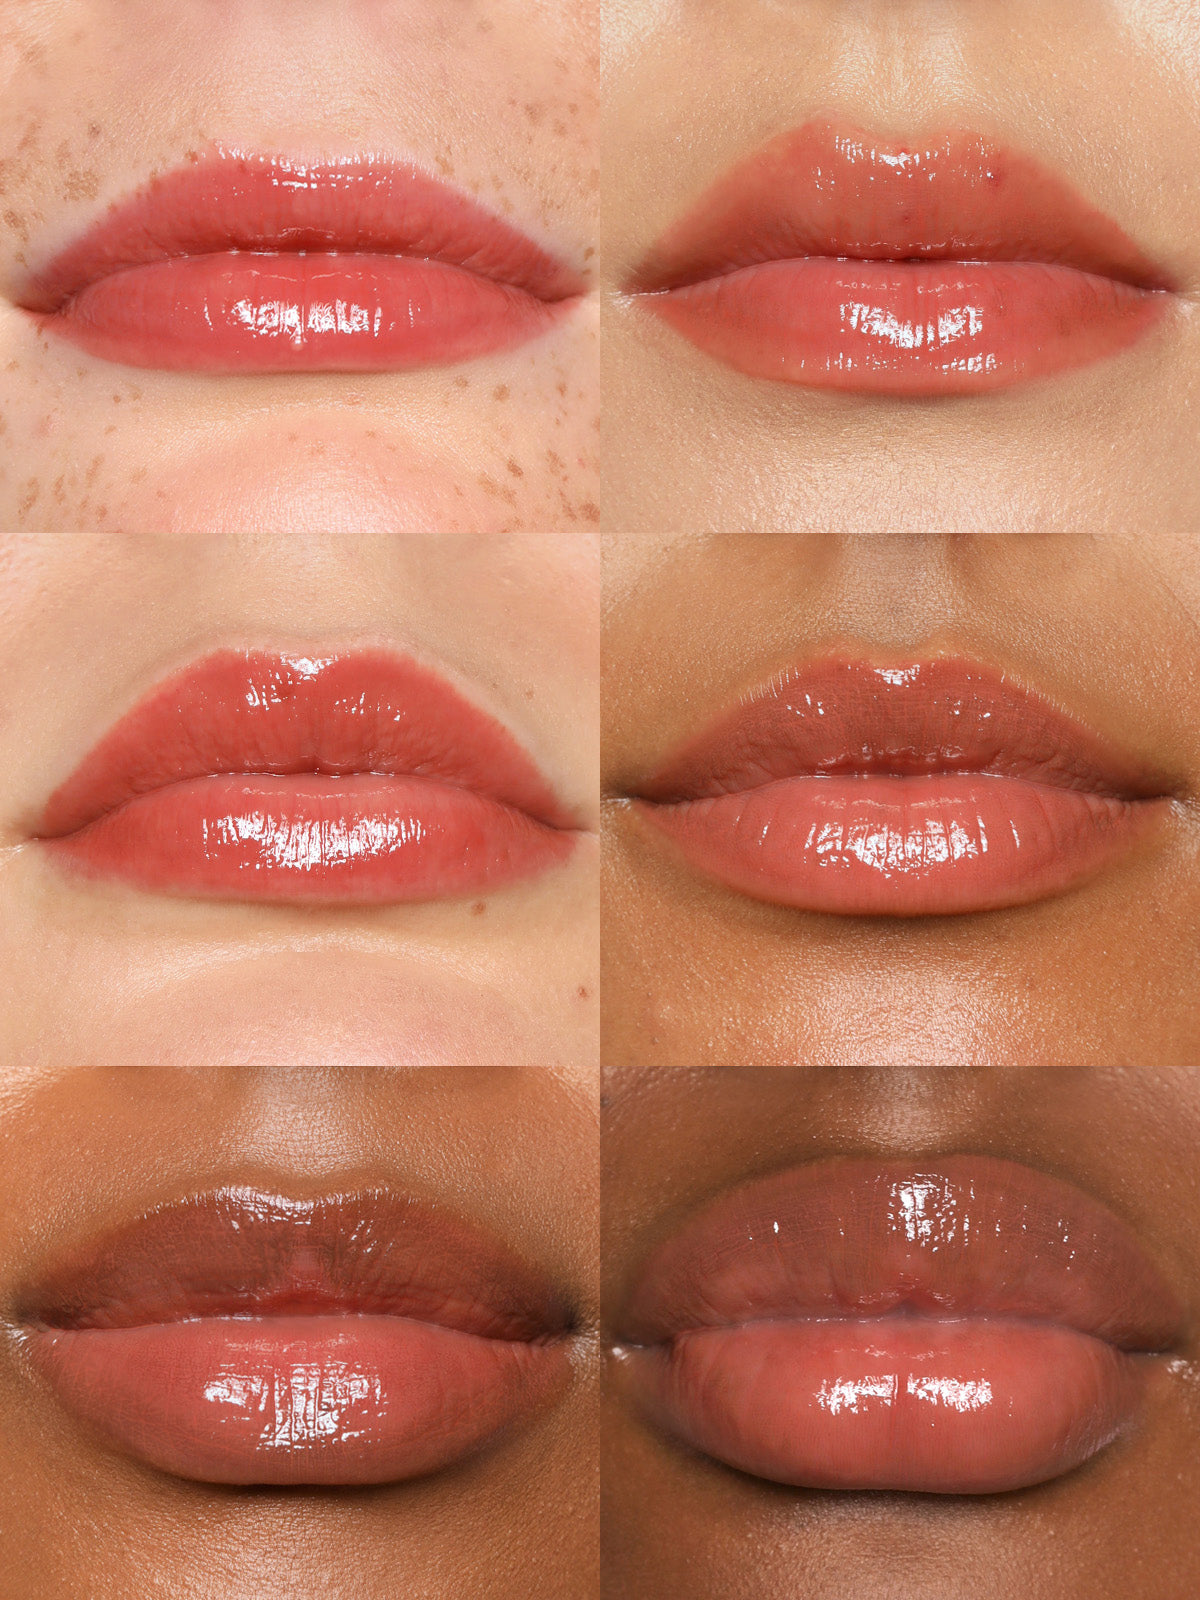 GRID OF REFY LIP GLOSS IN SHADE DUSK ON DIFFERENT SKIN TONES